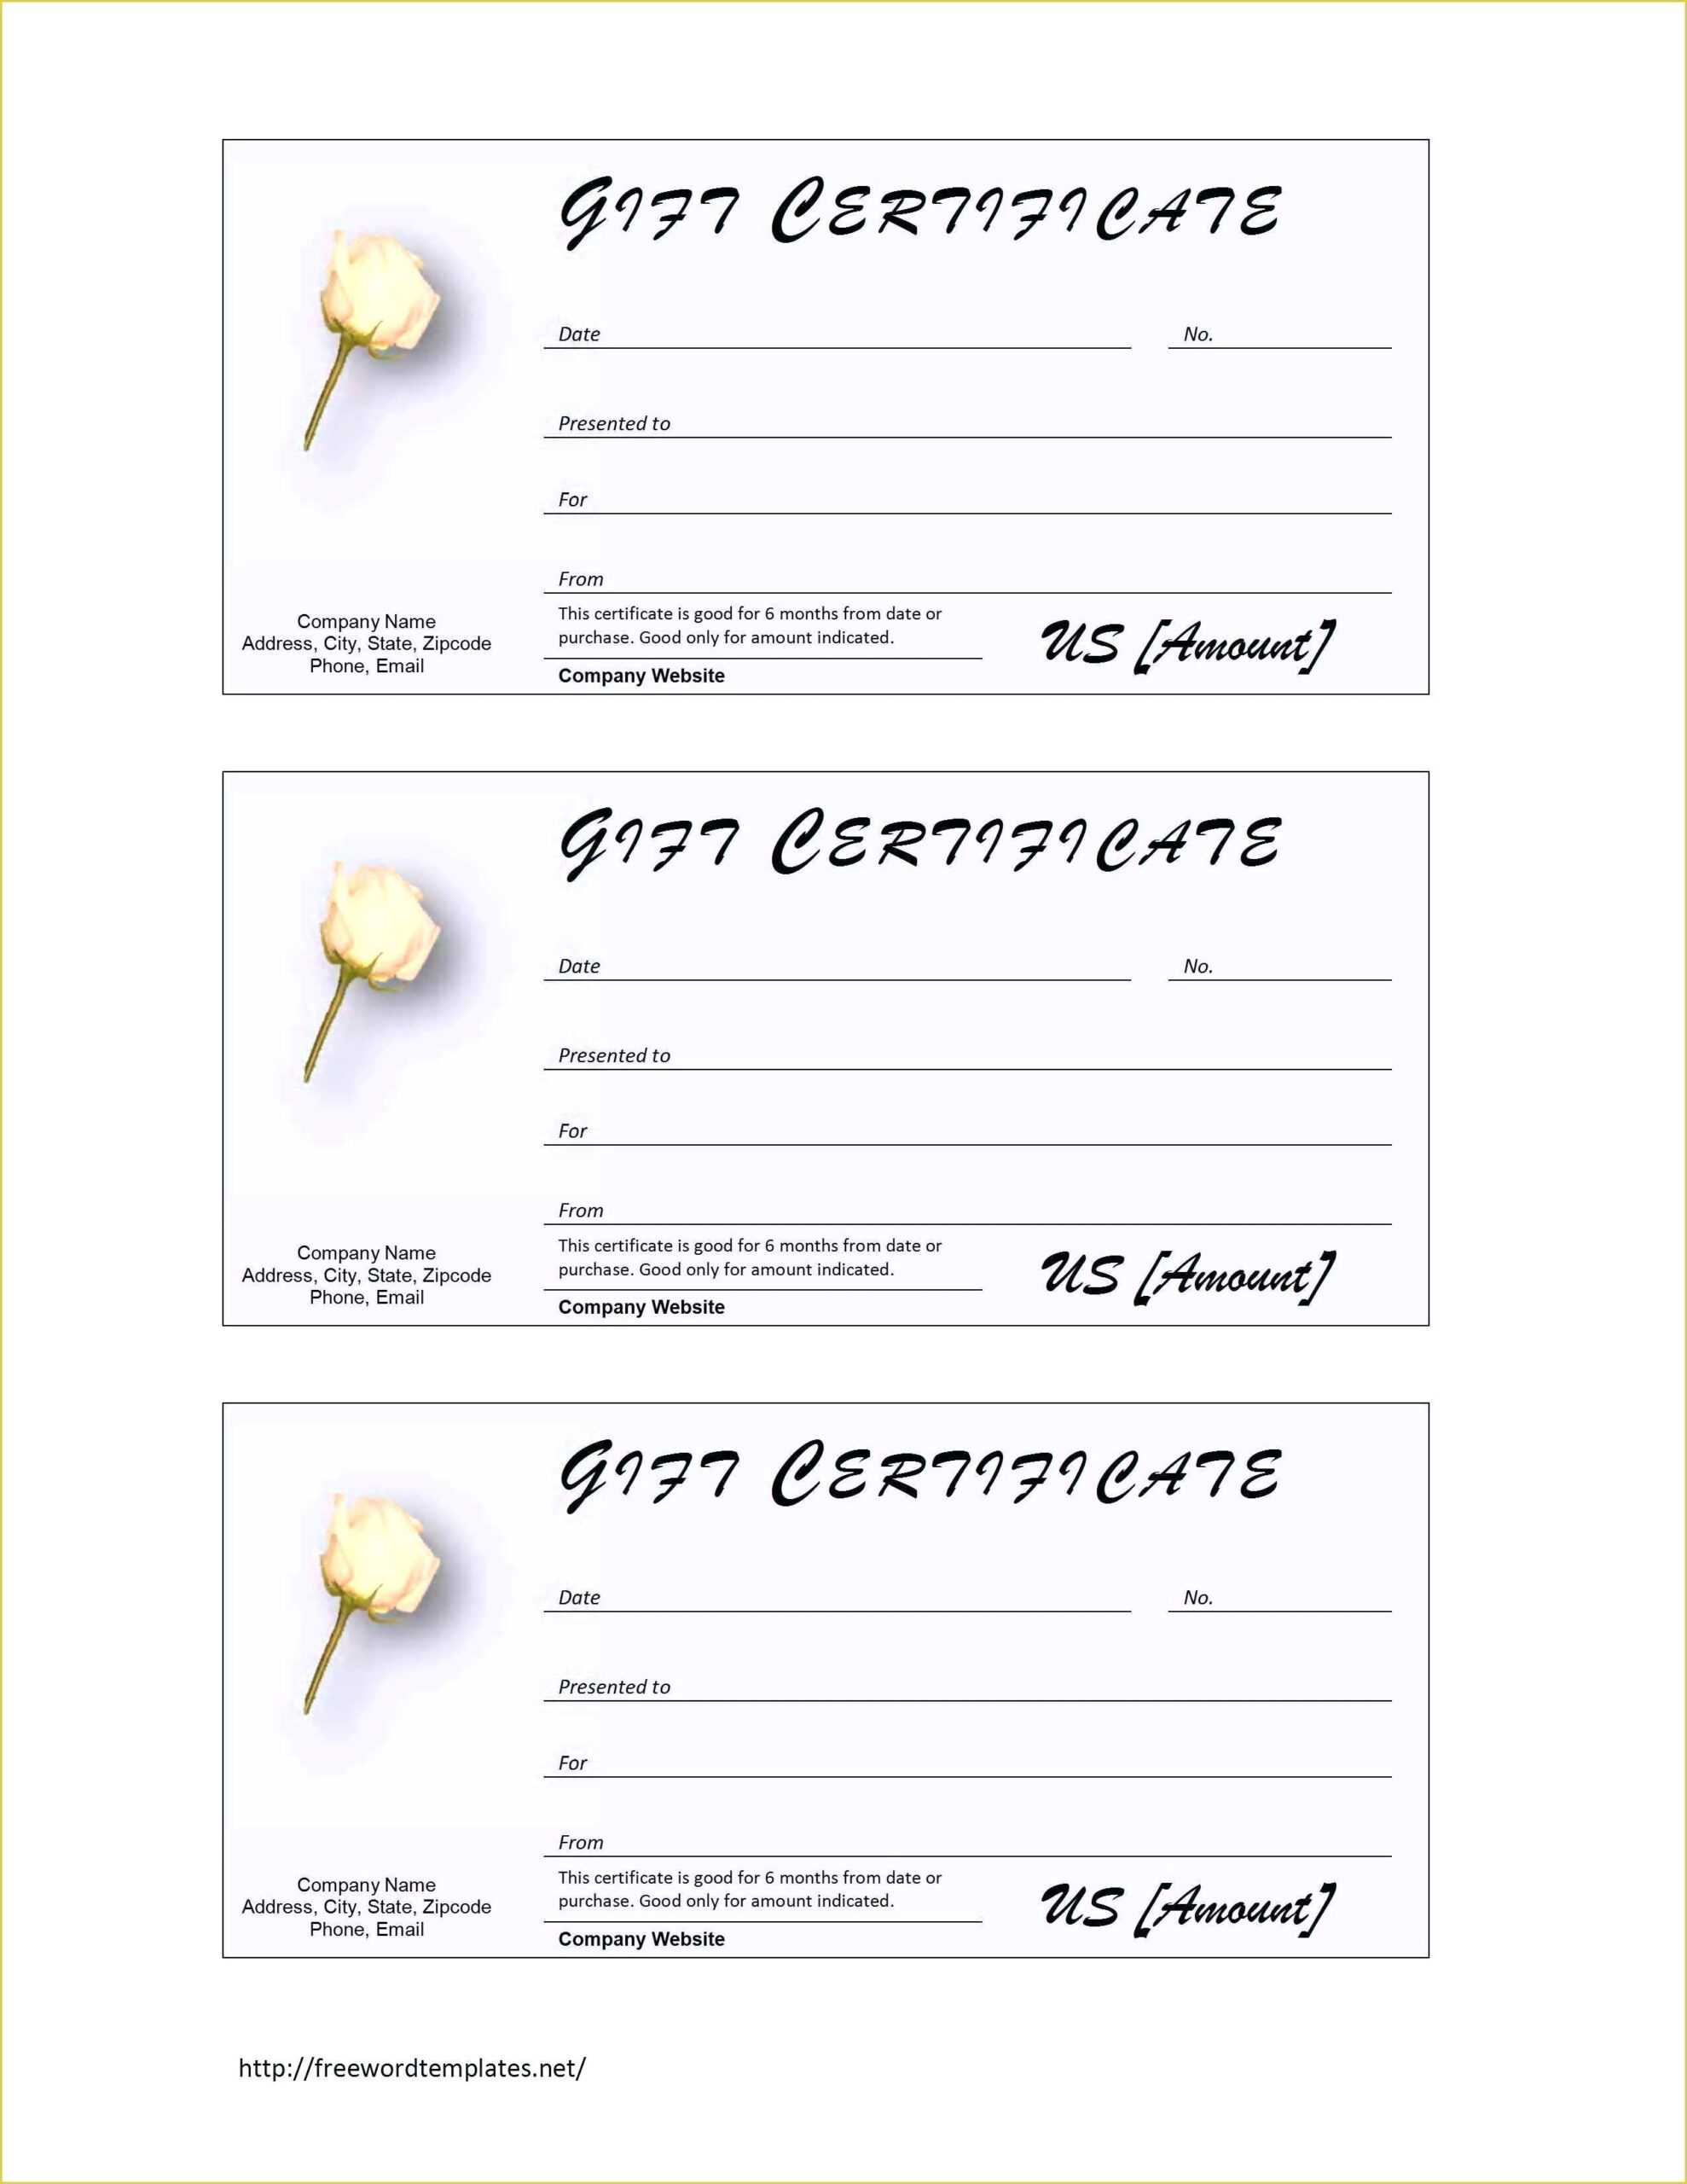 Template: Free Gift Certificate Template Designs Customize Intended For Magazine Subscription Gift Certificate Template